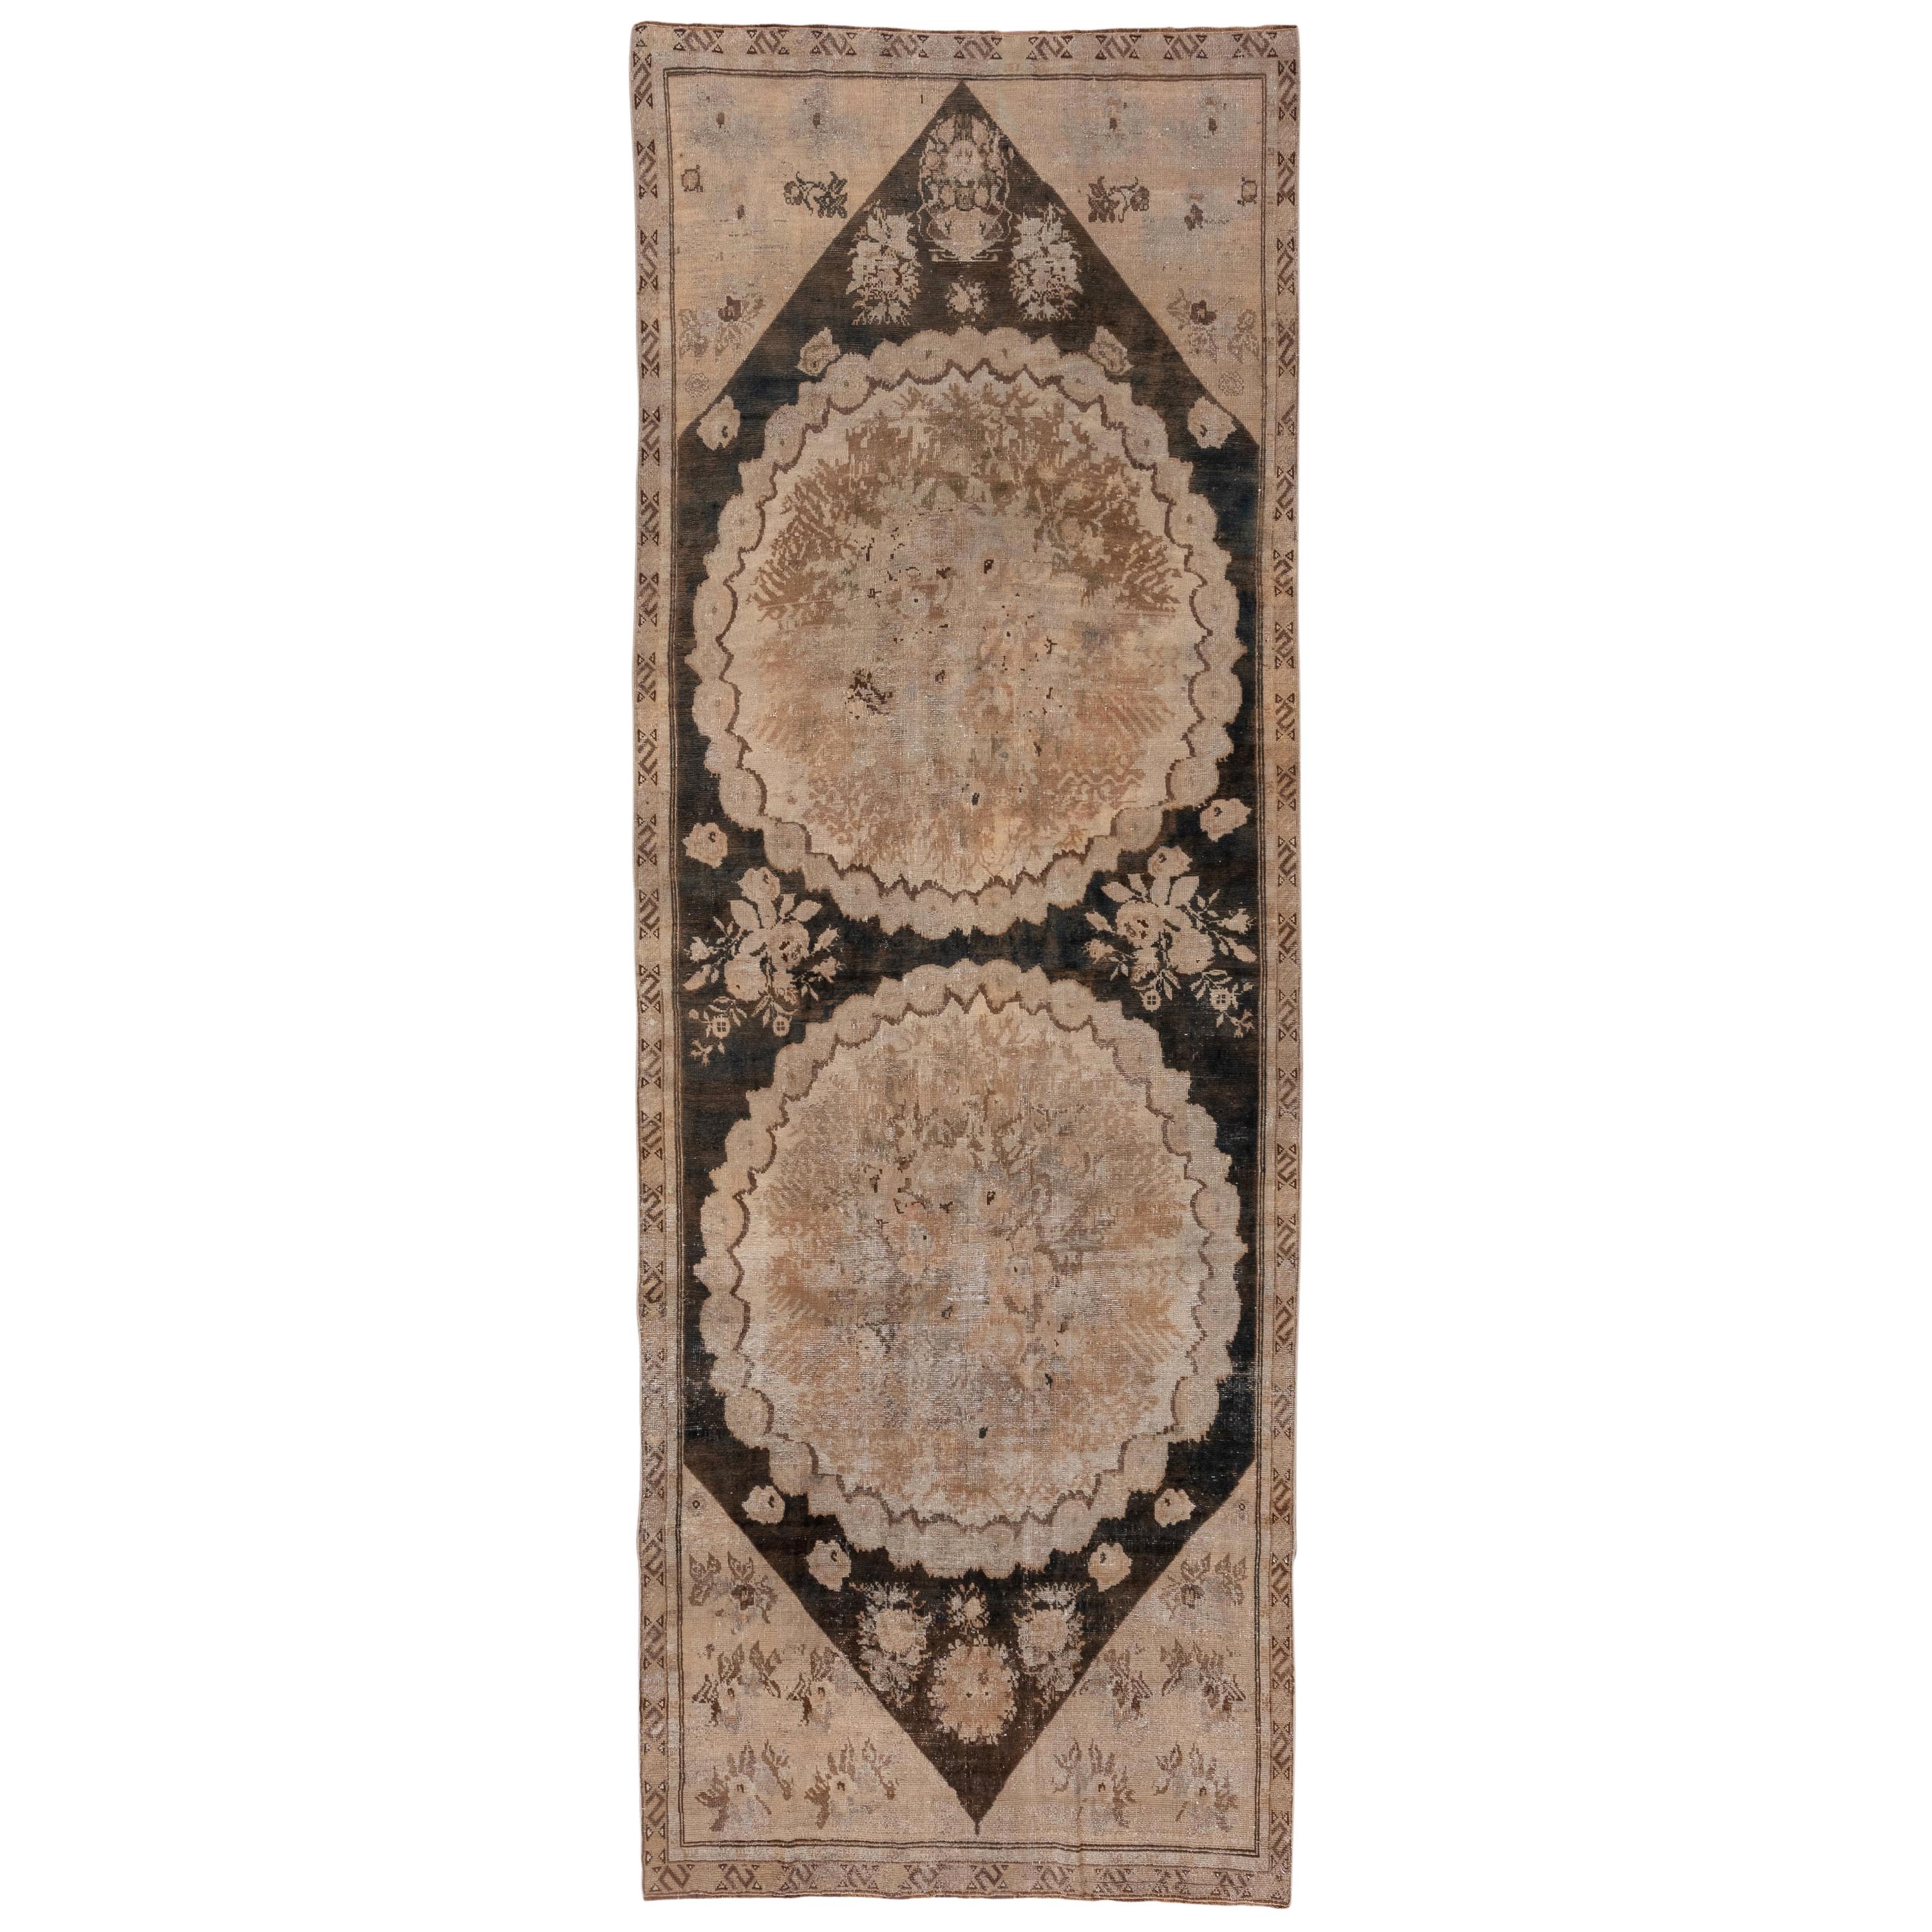 Antique Caucasian Karabagh Gallery Rug with Earth Tones